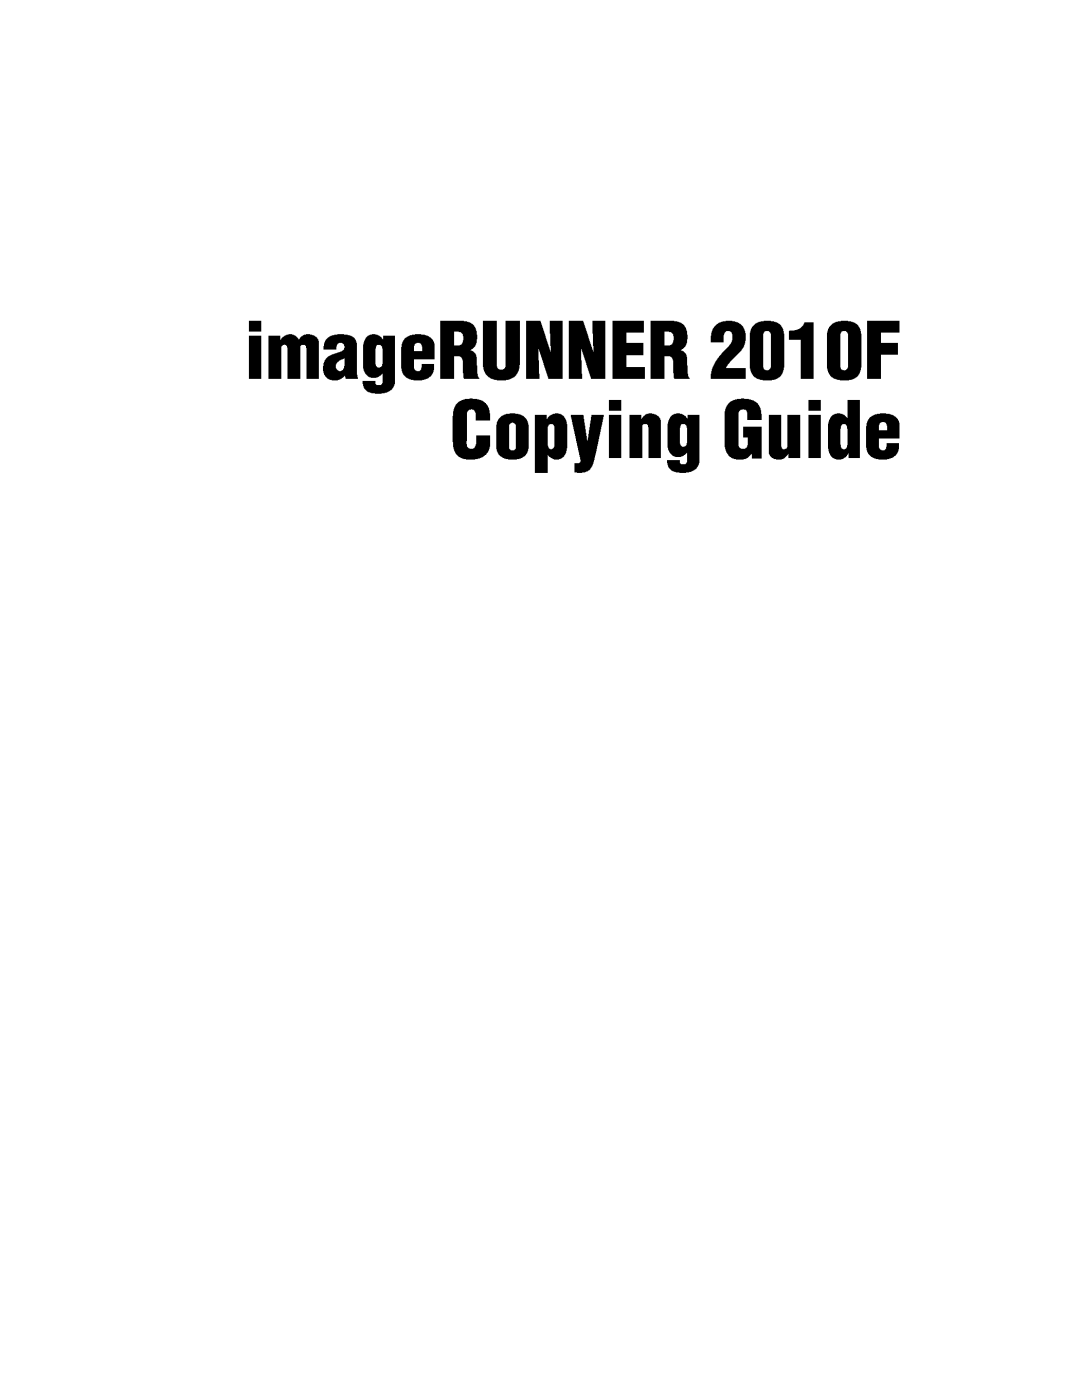 Canon manual imageRUNNER 2010F Copying Guide 